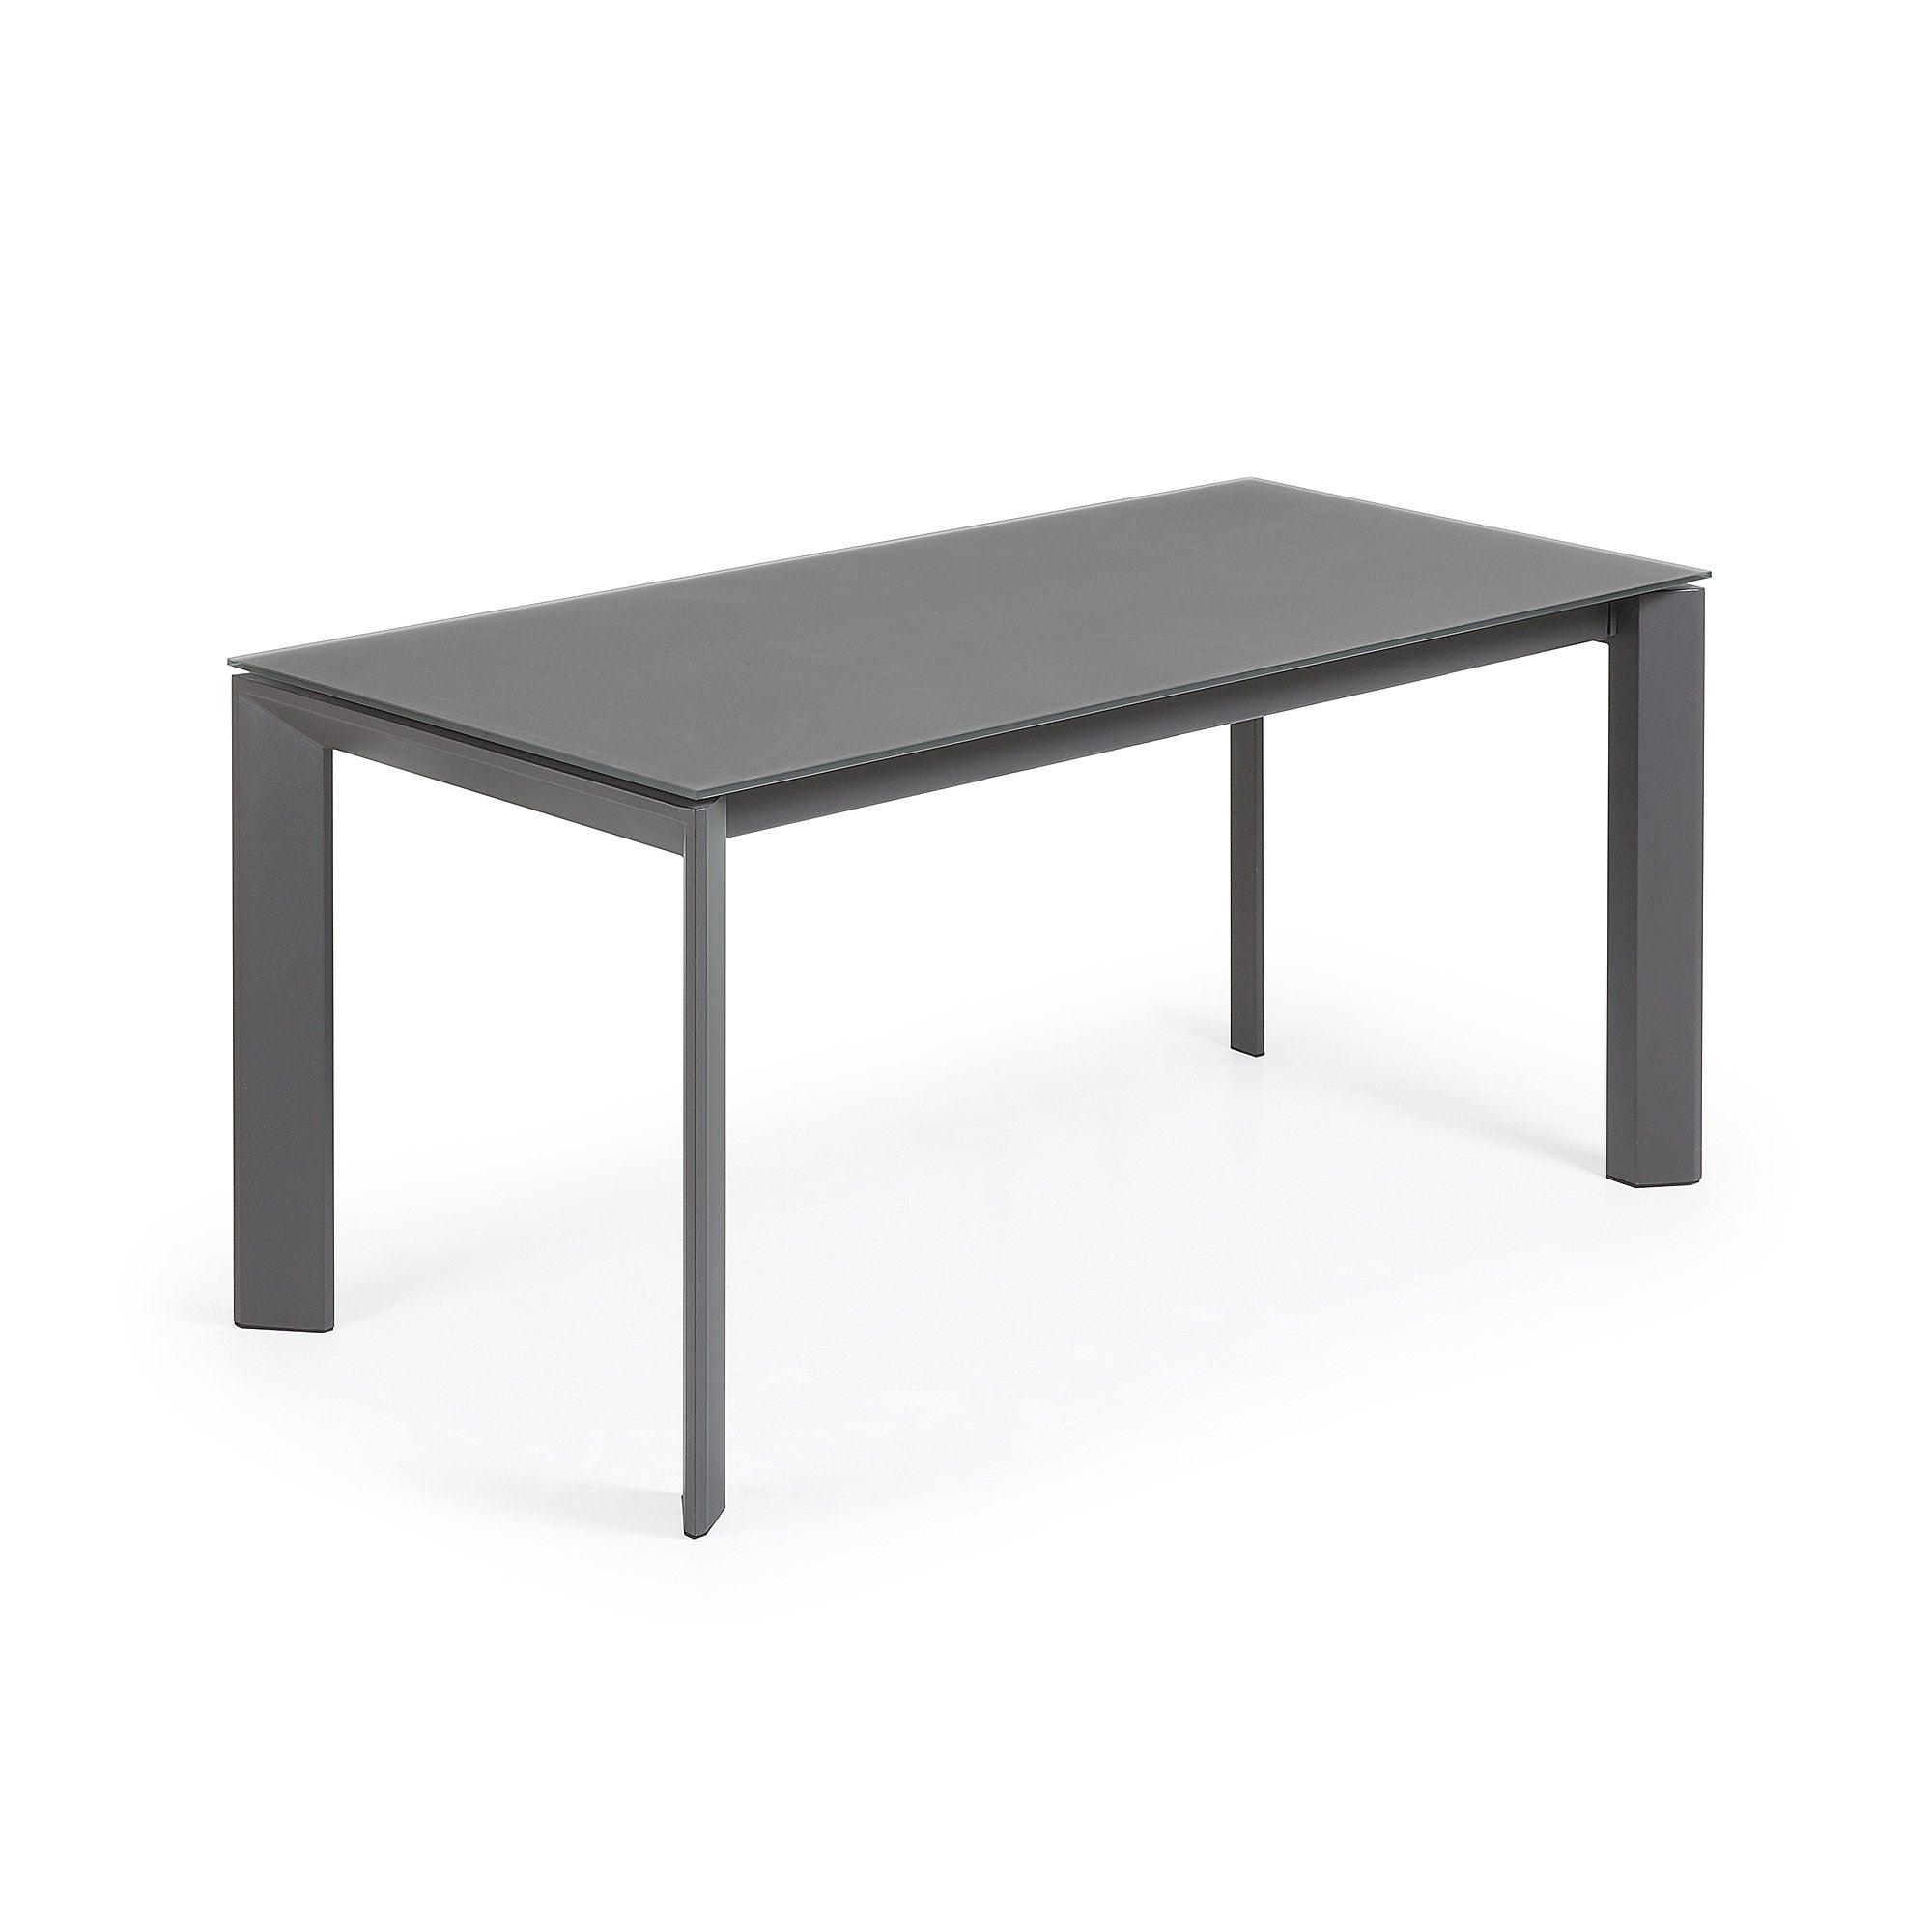 Axis extendable table in grey glass with steel legs in a dark grey finish, 160 (220) cm